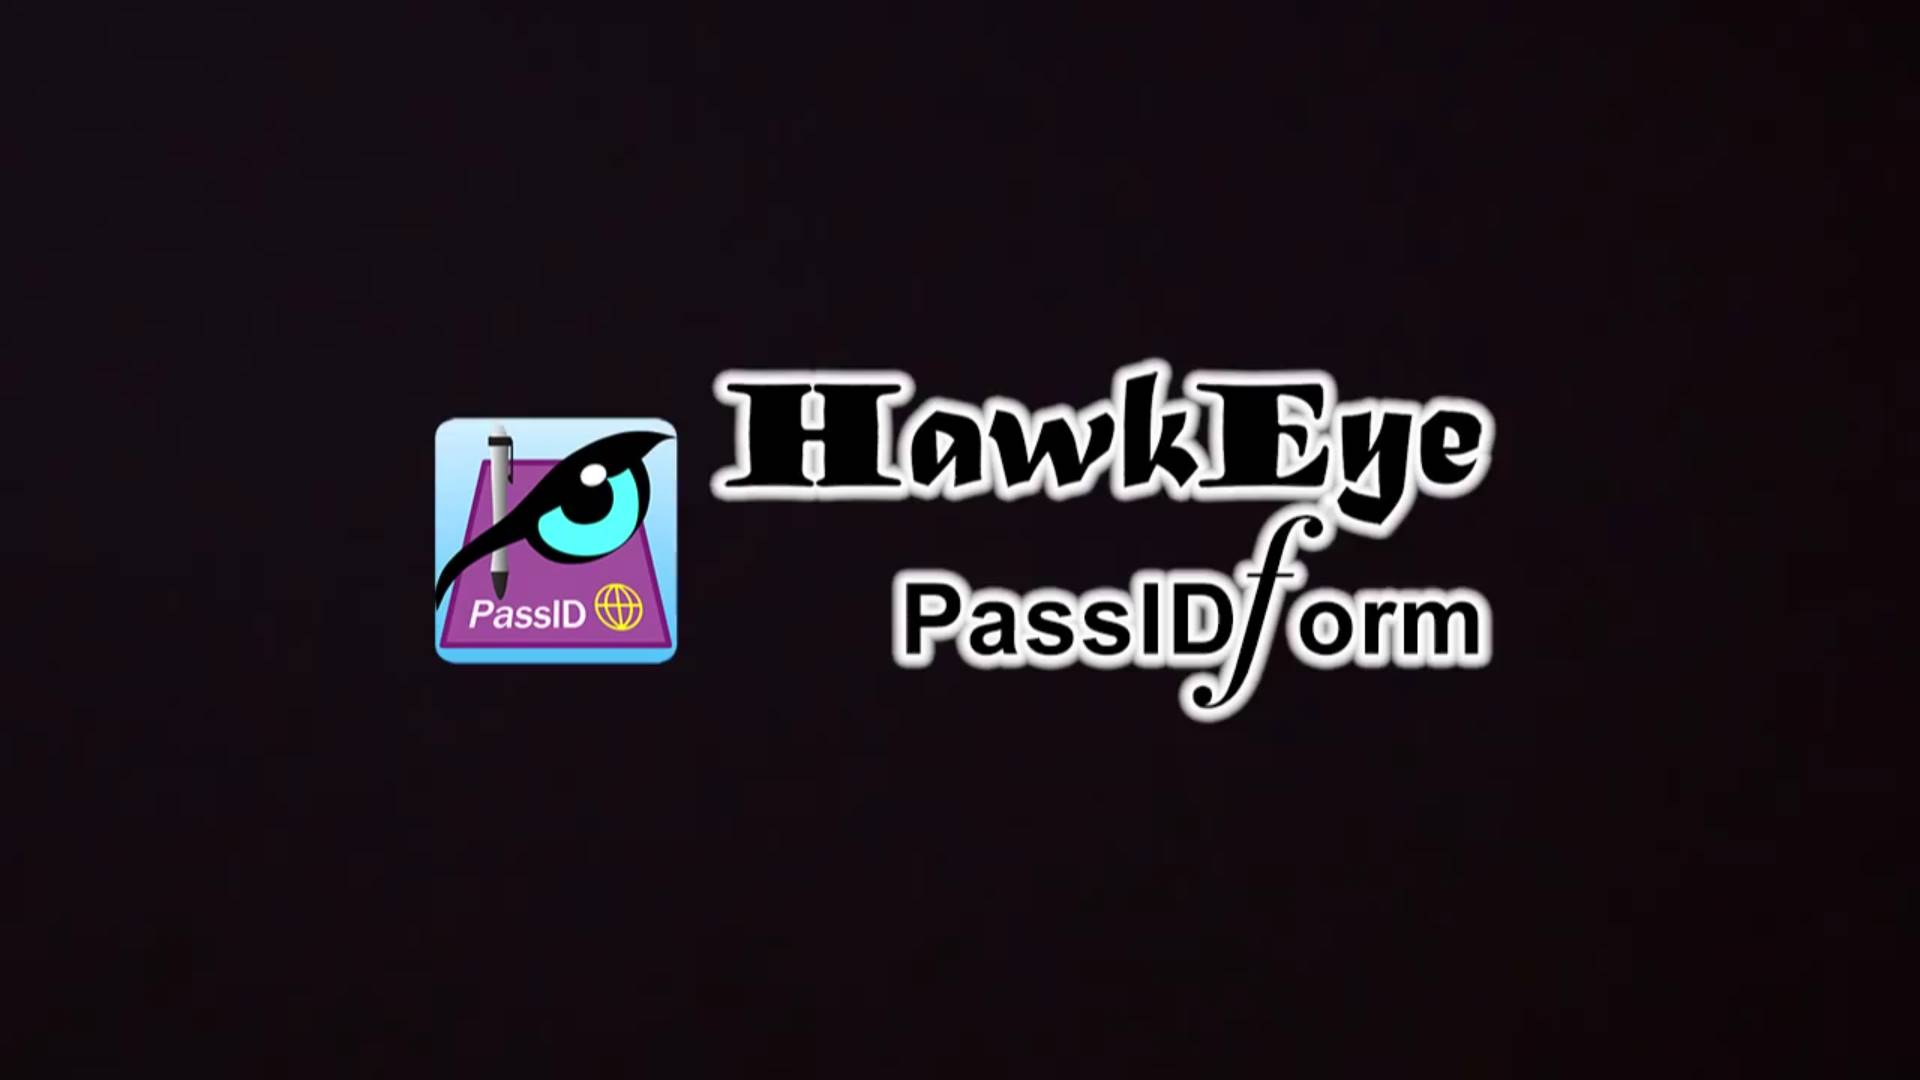 You are currently viewing HawkEye PassIDform